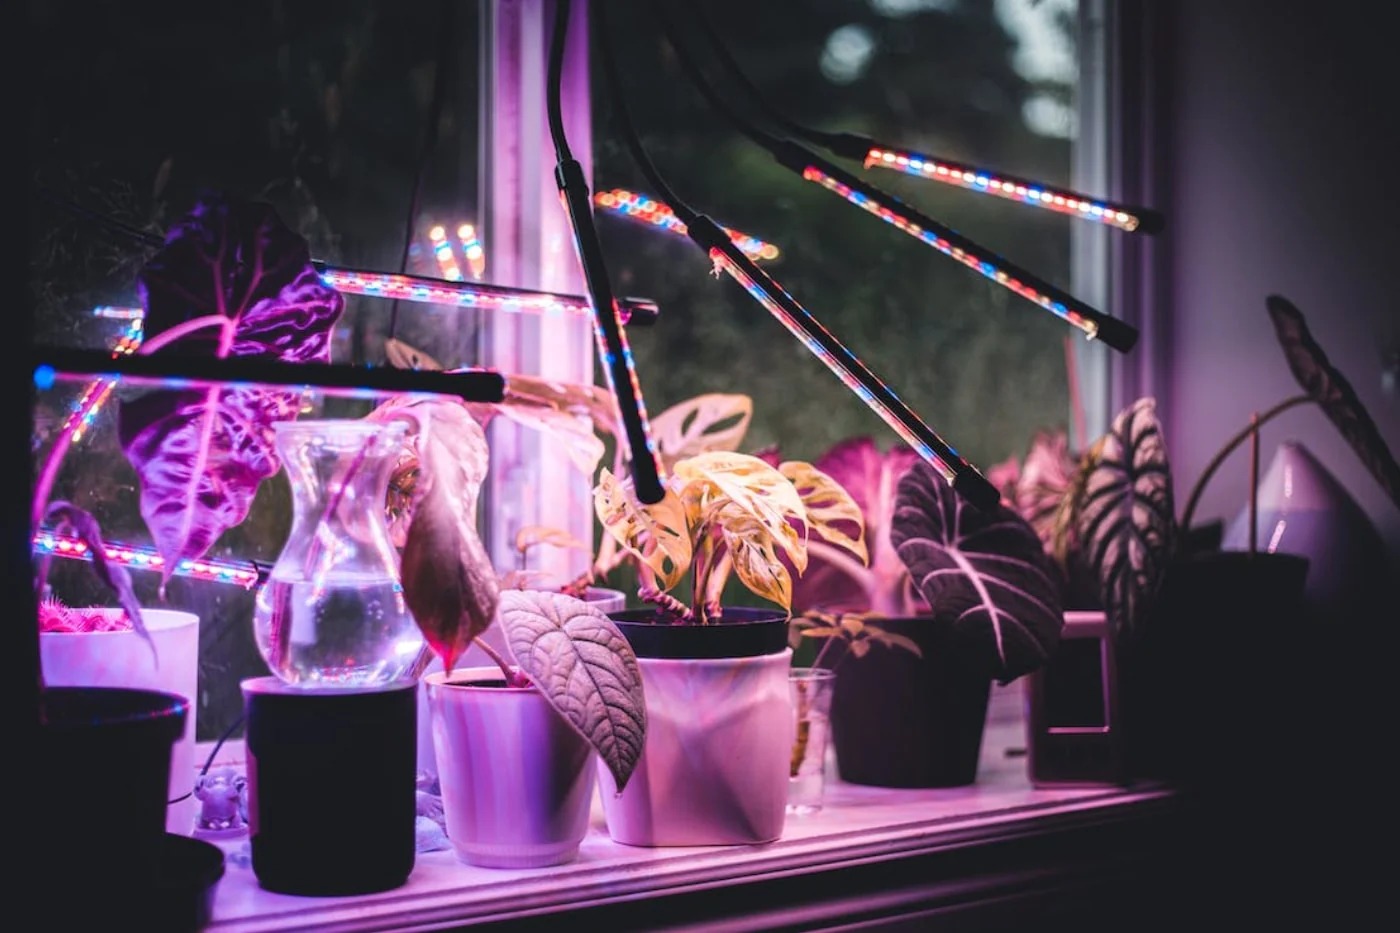 LED Grow Lights: The Future of Indoor Gardening